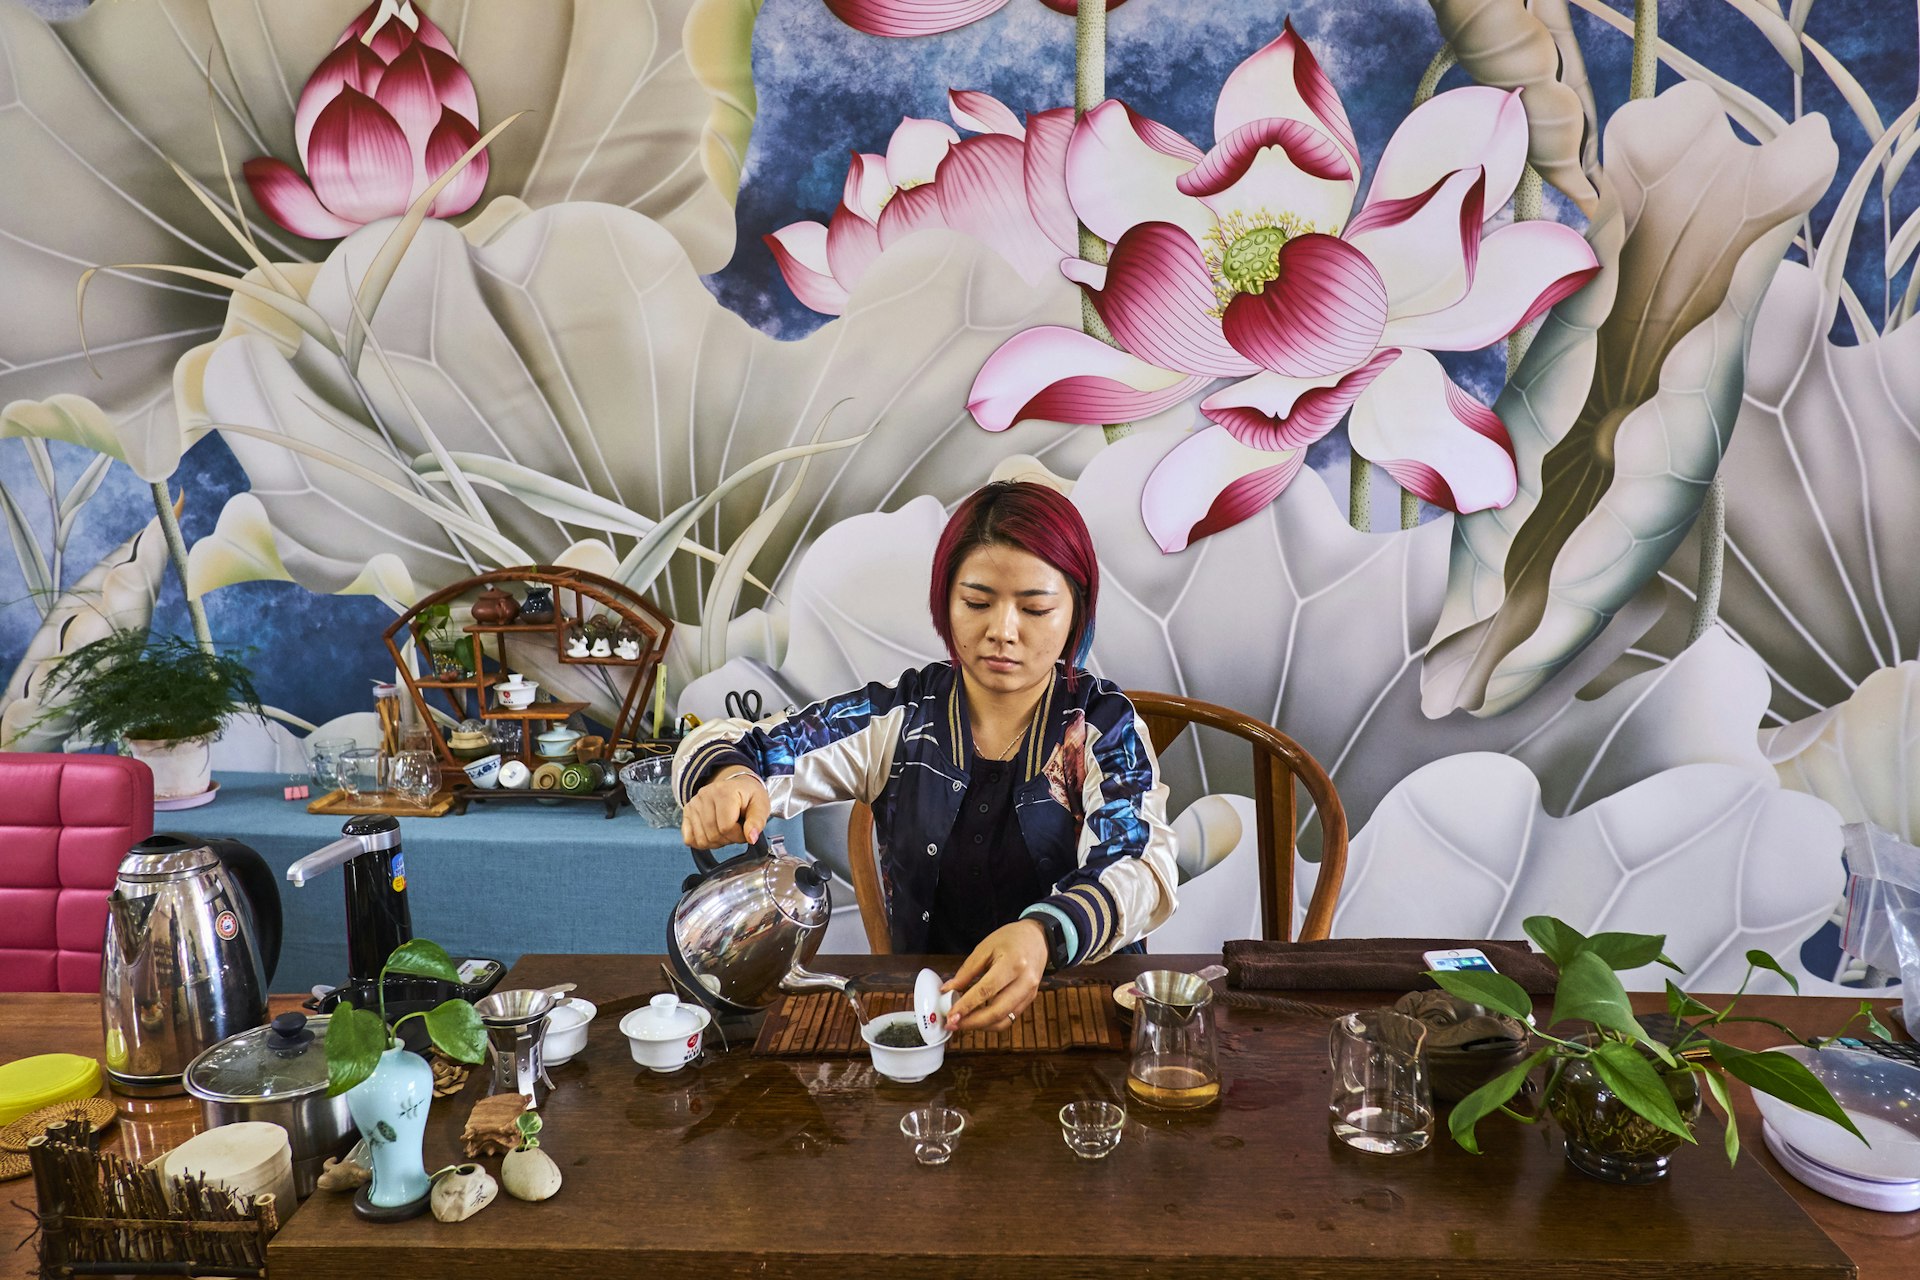 A woman with pink hair pours tea from a teapot in a shop with a large lily painted on the wall behind her